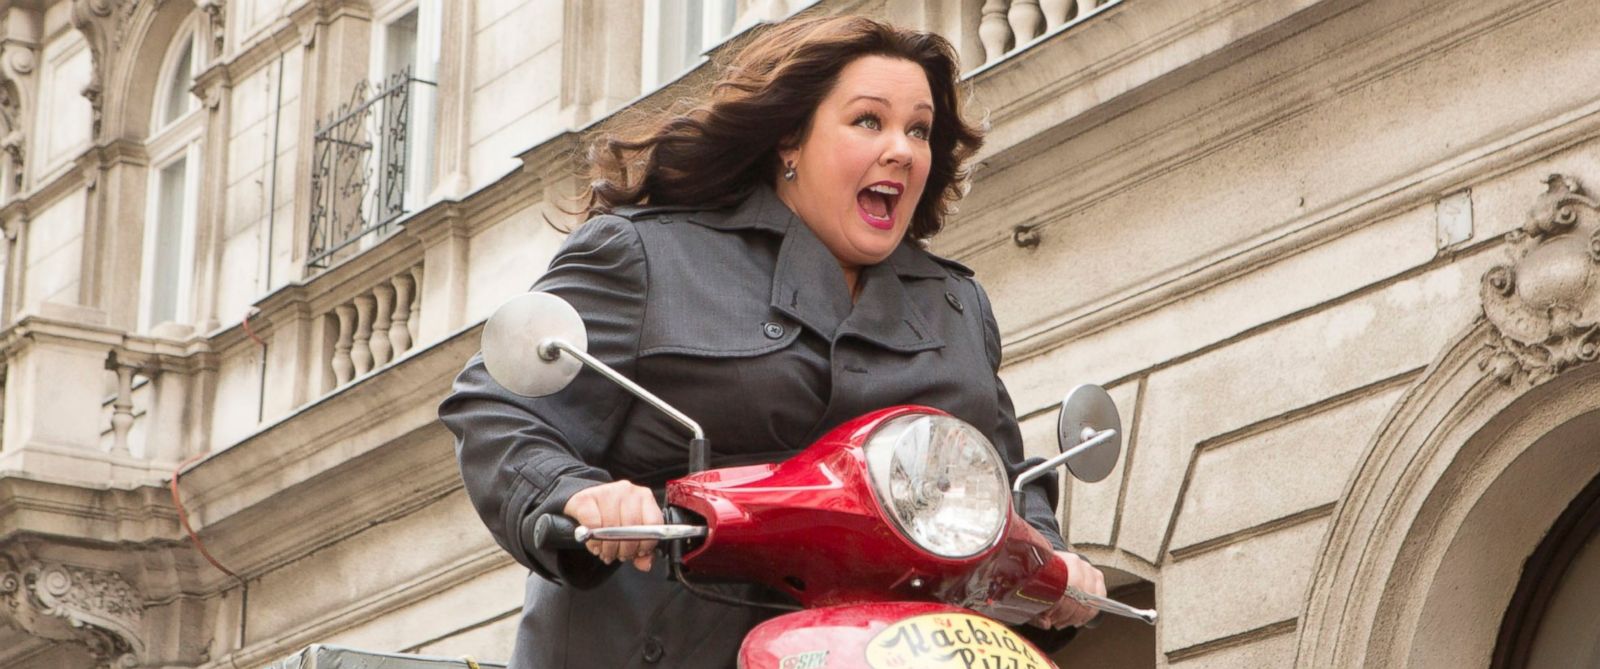 outtakes from the movie spy with melissa mccarthy